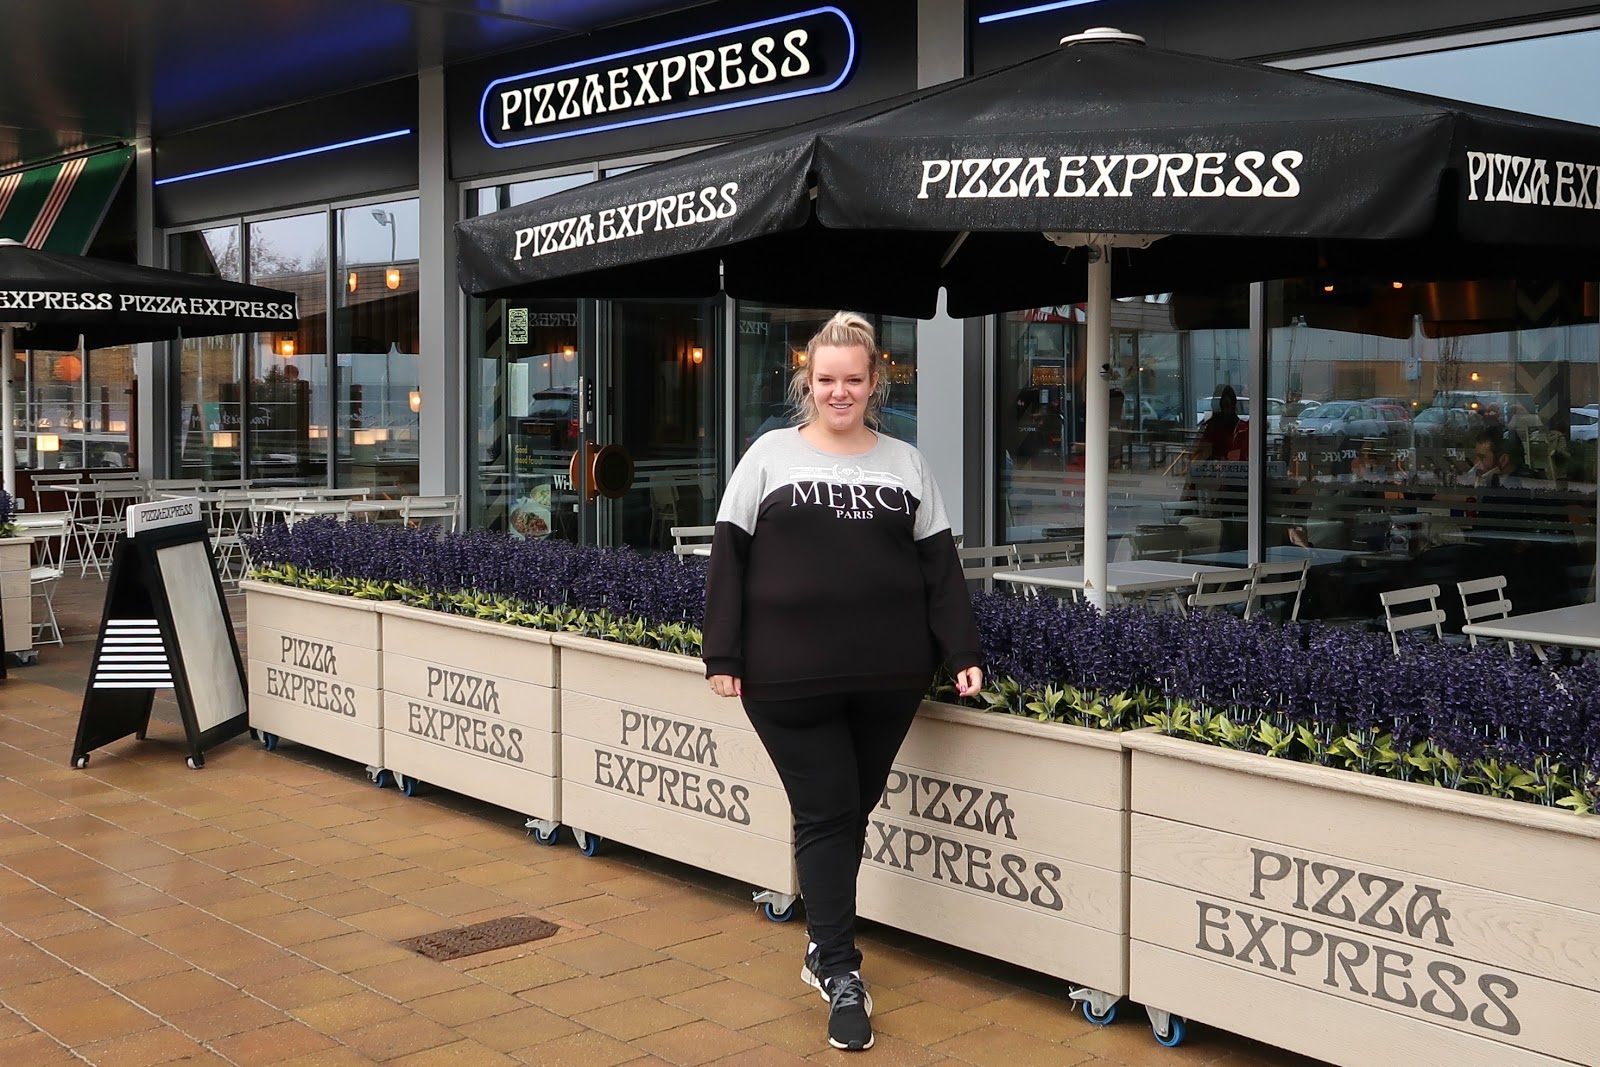 Dairy Free Express Lunch at Pizza Express, Dalton Park UK Lifestyle and Food Blogger WhatLauraLoves